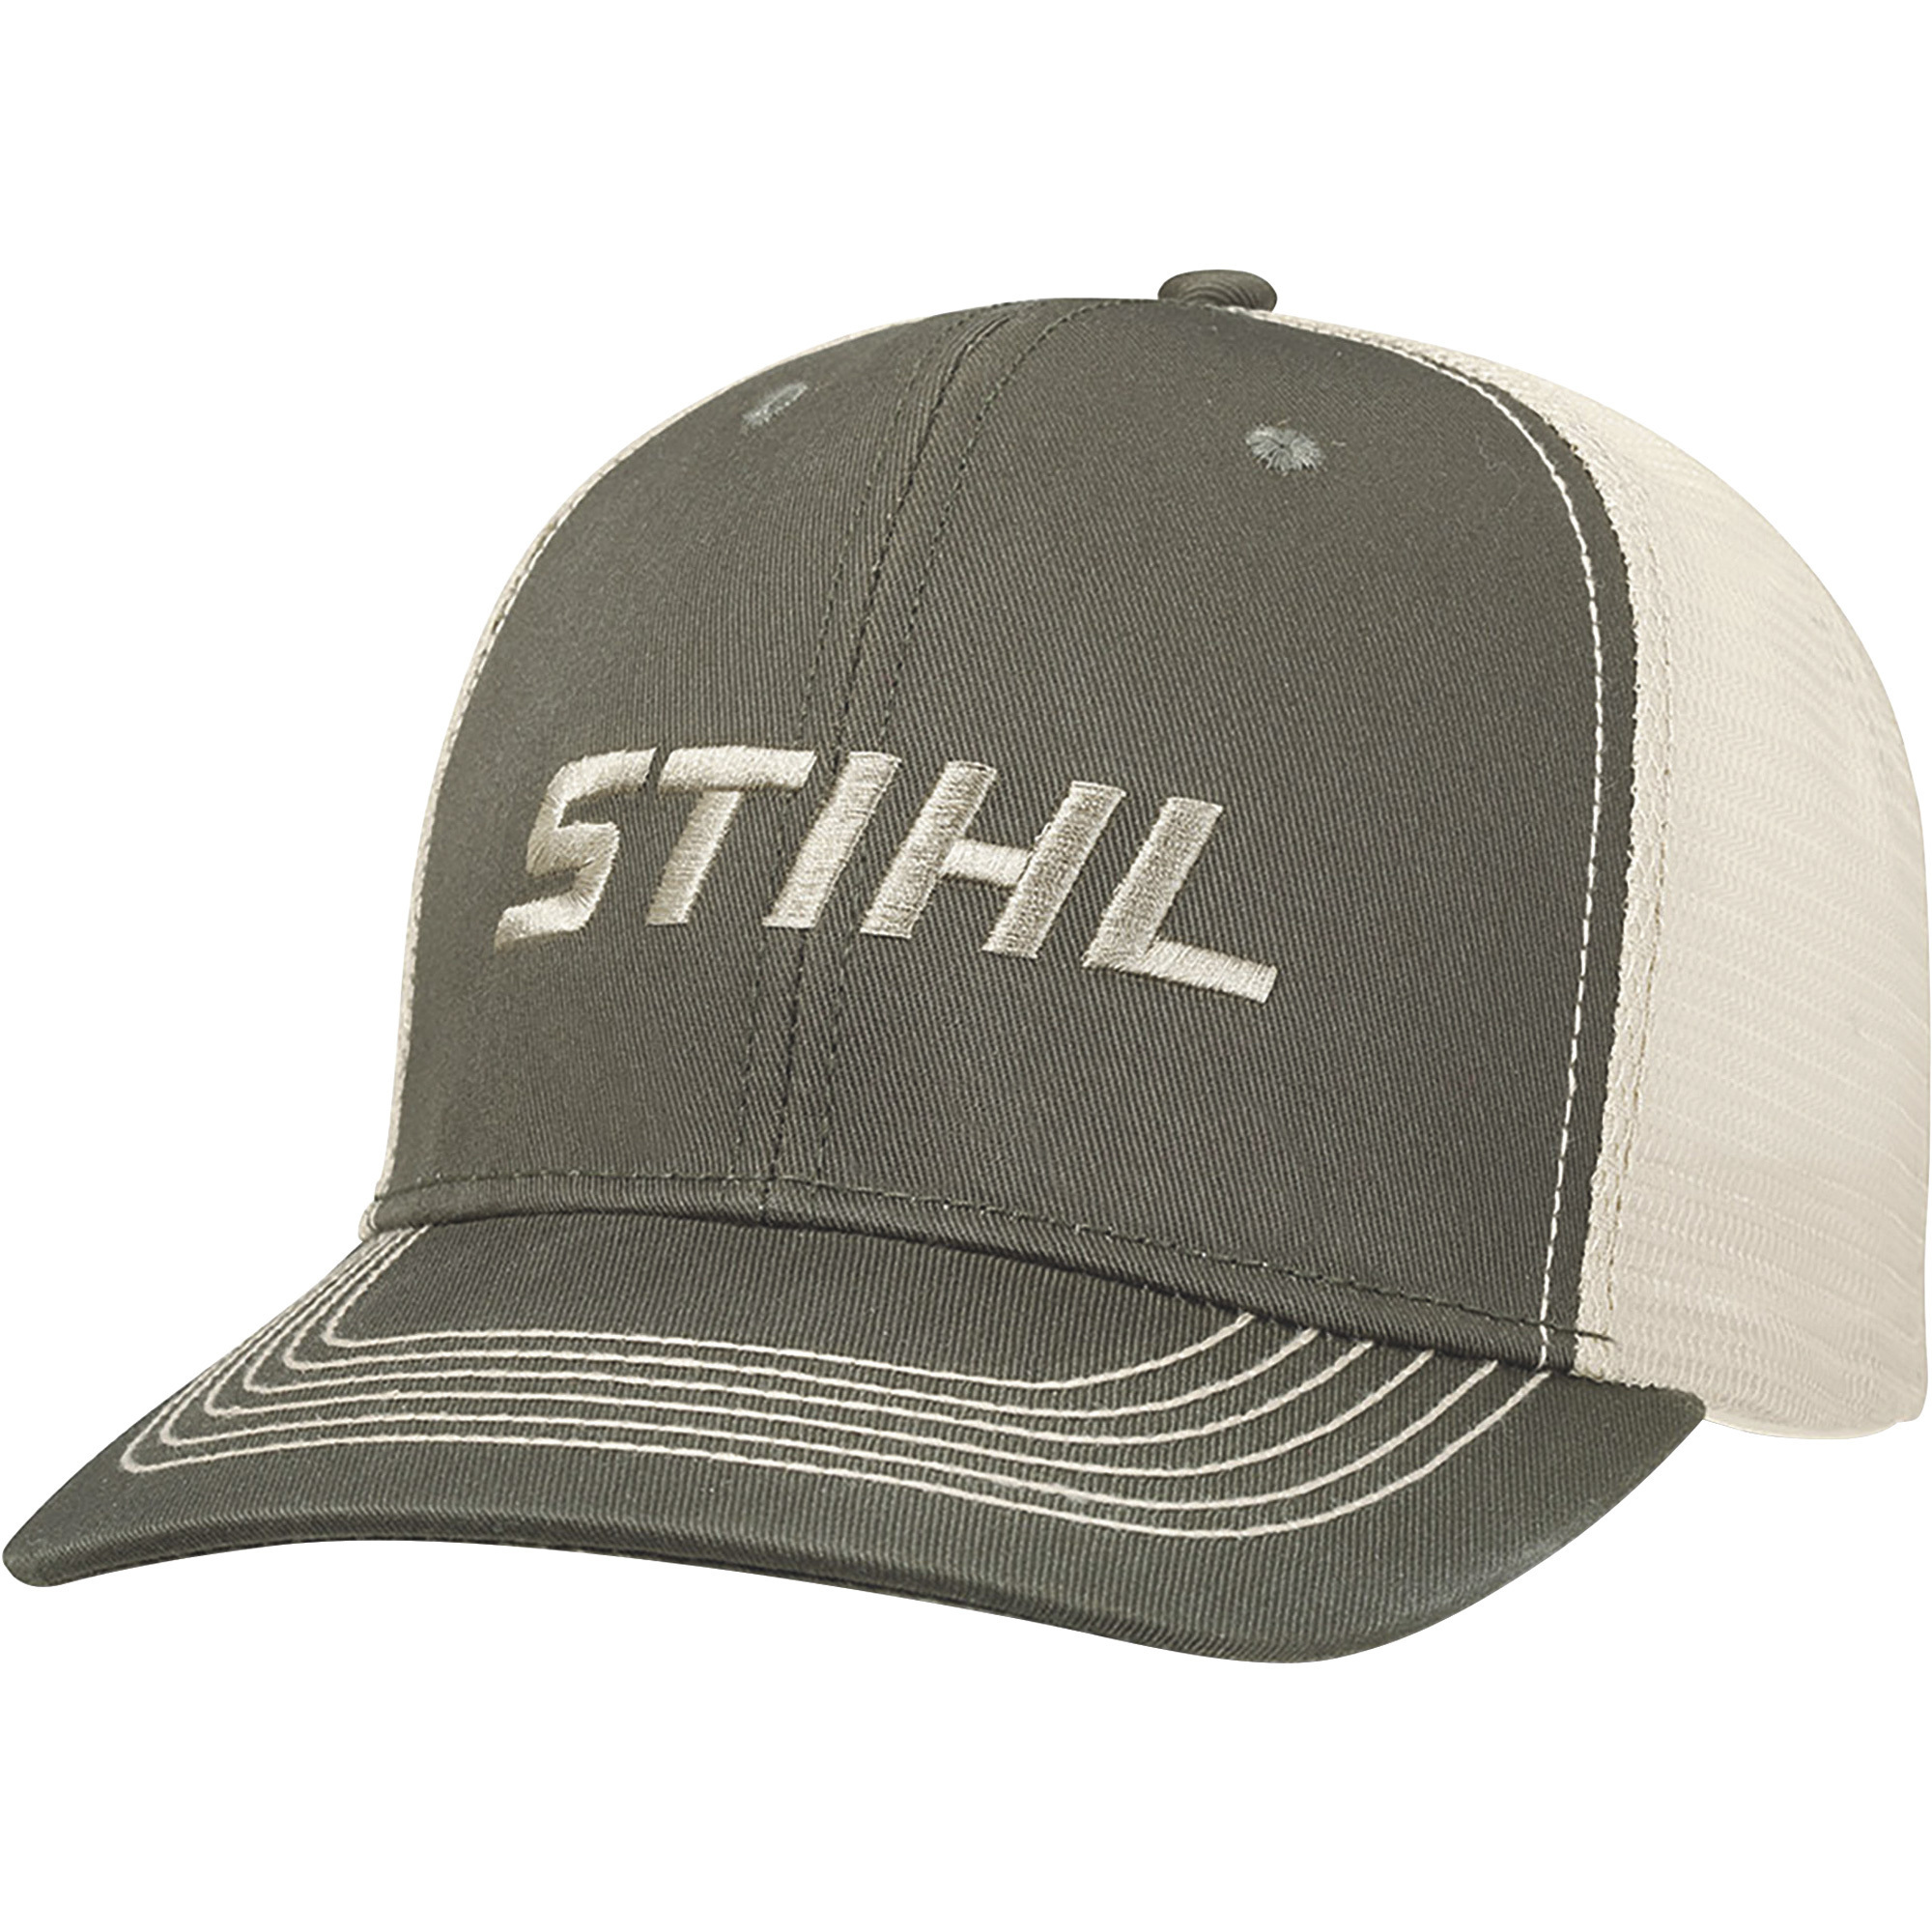 STIHL Outfitters Trademark Twill Cap with Mesh Back â Adjustable, Olive/Tan, Adjustable Plastic Snap Back